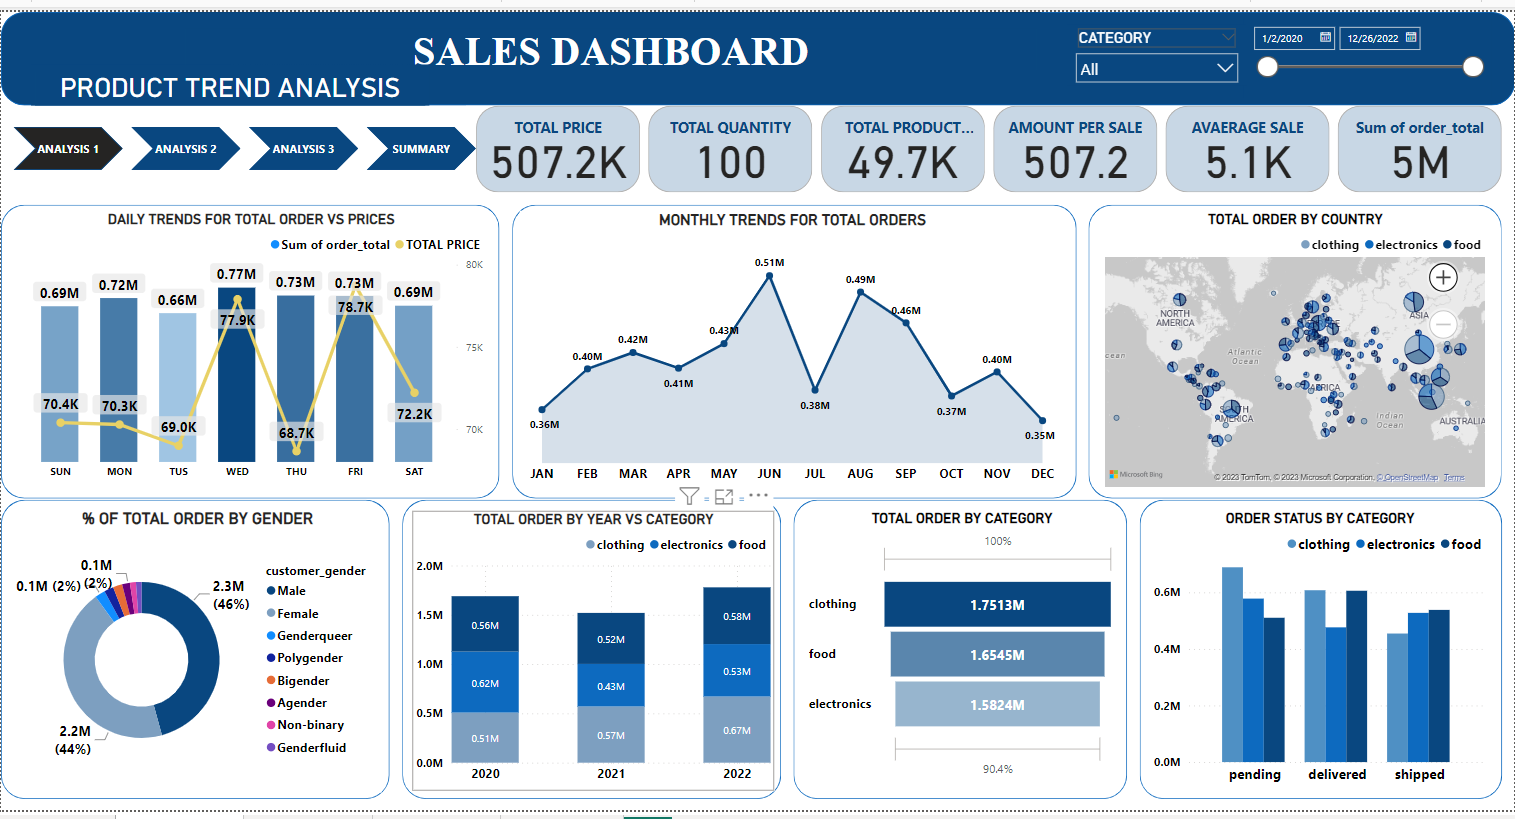 SALES DASHBOARD CATEGORY

AR

PRODUCT TREND ANALYSIS
= = = = TOTAL PRICE TOTAL QUANTITY TOTAL PRODUCT. AMOUNT PER SALE AVAERAGE SALE Sum of order total
507.2K 100 497K 507.2 51K 5M
DAILY TRENDS FOR TOTAL ORDER VS PRICES MONTHLY TRENDS FOR TOTAL ORDERS TOTAL ORDER BY COUNTRY

 

 

®ctothing

  

om onm
069M al on 069M

I oem REA
704K = 1 1] =n

  

HE me

" JAN HIE MAR APR MAY JUN JUL AUG SIF OCT NOV DEC Pome Ton © £5 ht Cpr, § Aire
% OF TOTAL ORDER BY GENDER TOTAL ORDER BY YEAR VS CATEGORY TOTAL ORDER BY CATEGORY ORDER STATUS BY CATEGORY

© clothing ® rirctions ®lood © clothing ® electronics ©1000
01m Customer gender 2om

01M (2%) 2% IM gpa

 

 

® fugendes
© Agender rcteancs
om v om
2m © Non binary
(44%)
oom oom

nro 7071 027 ‘ pending Gelvered shipped